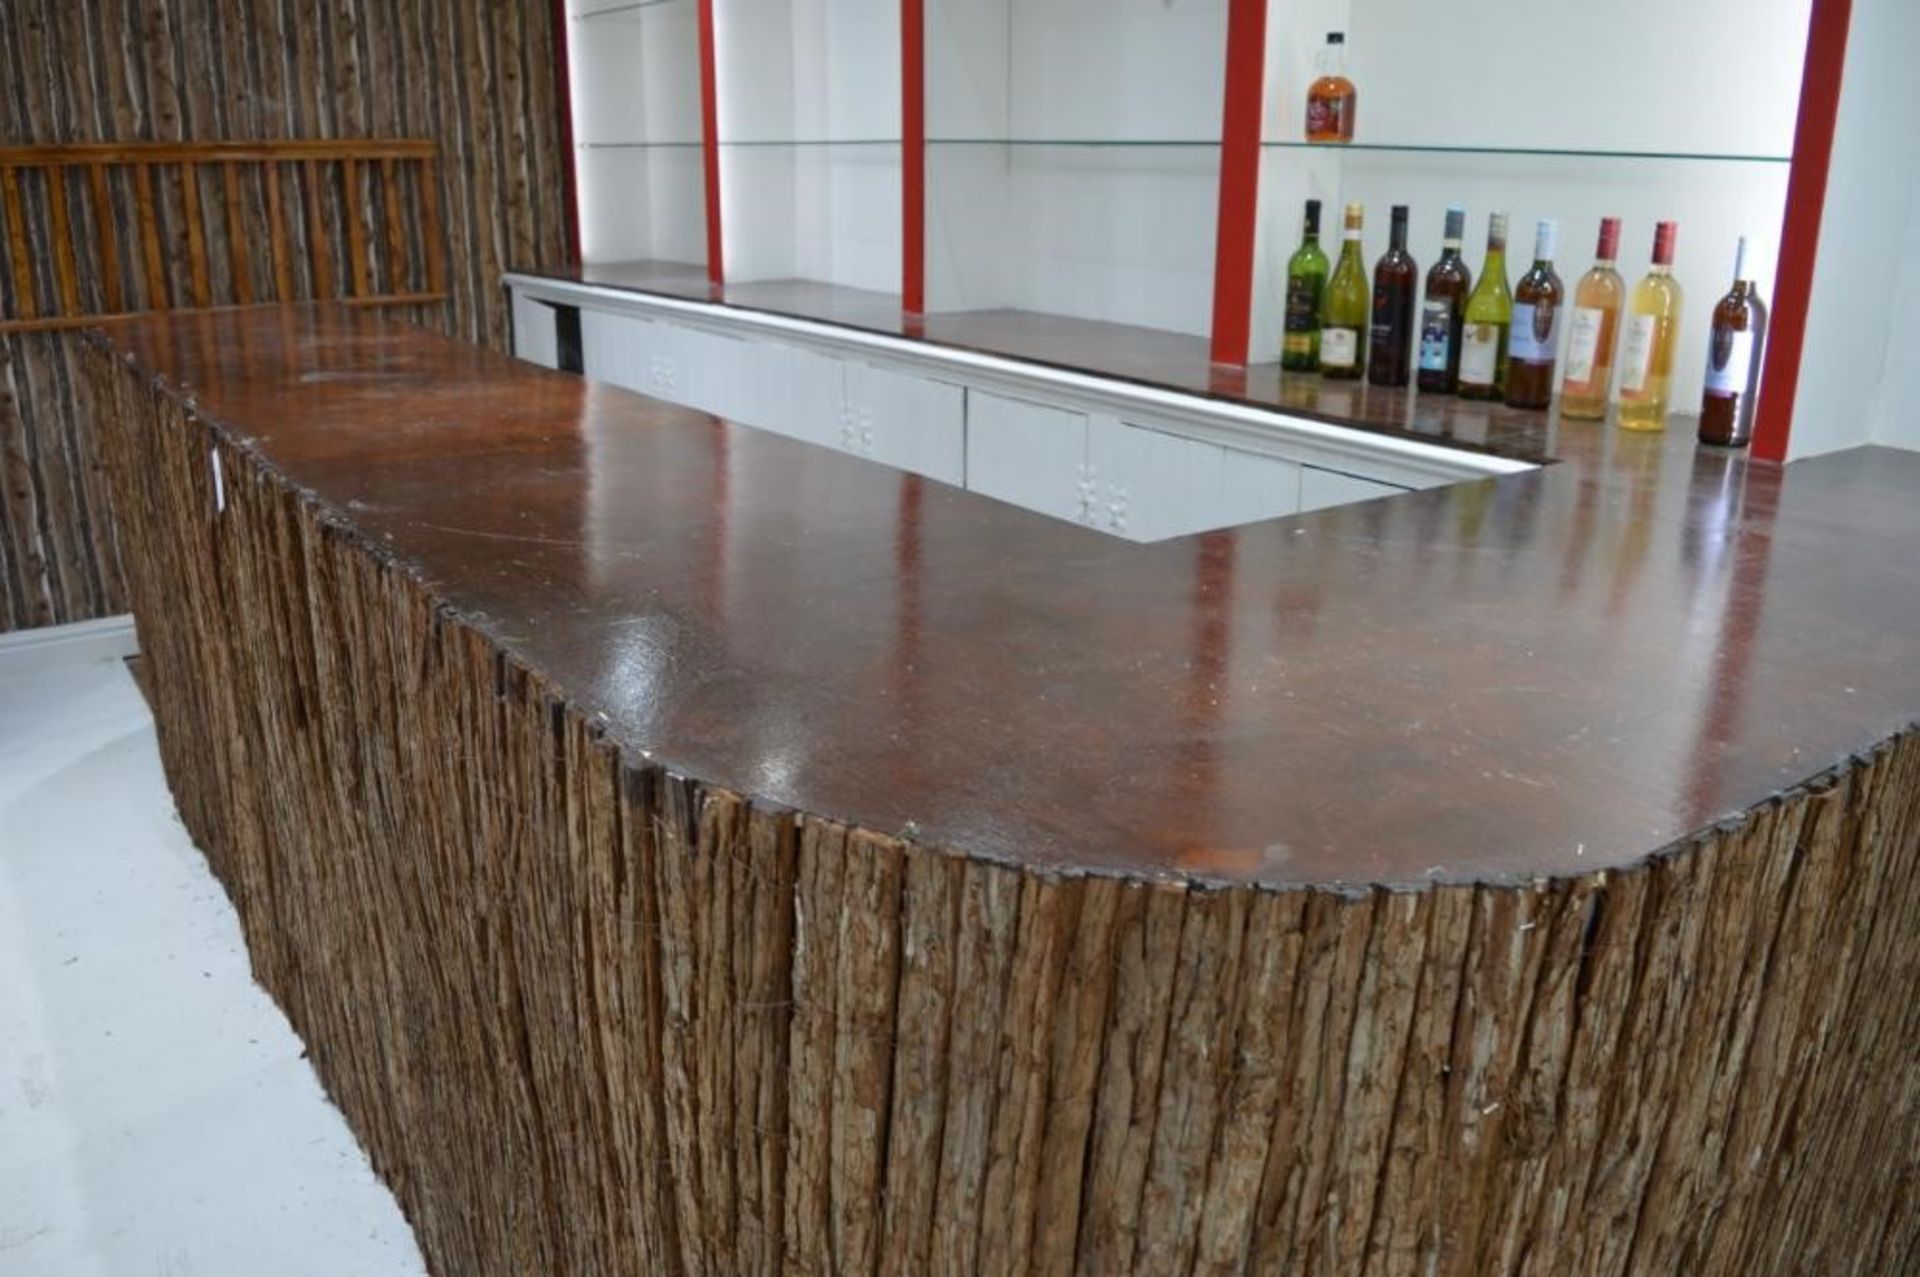 1 x Tiki Style Drinks Bar With Illuminated Rear Shelves and Unfinished Matching Seating Area - Ref B - Image 7 of 14